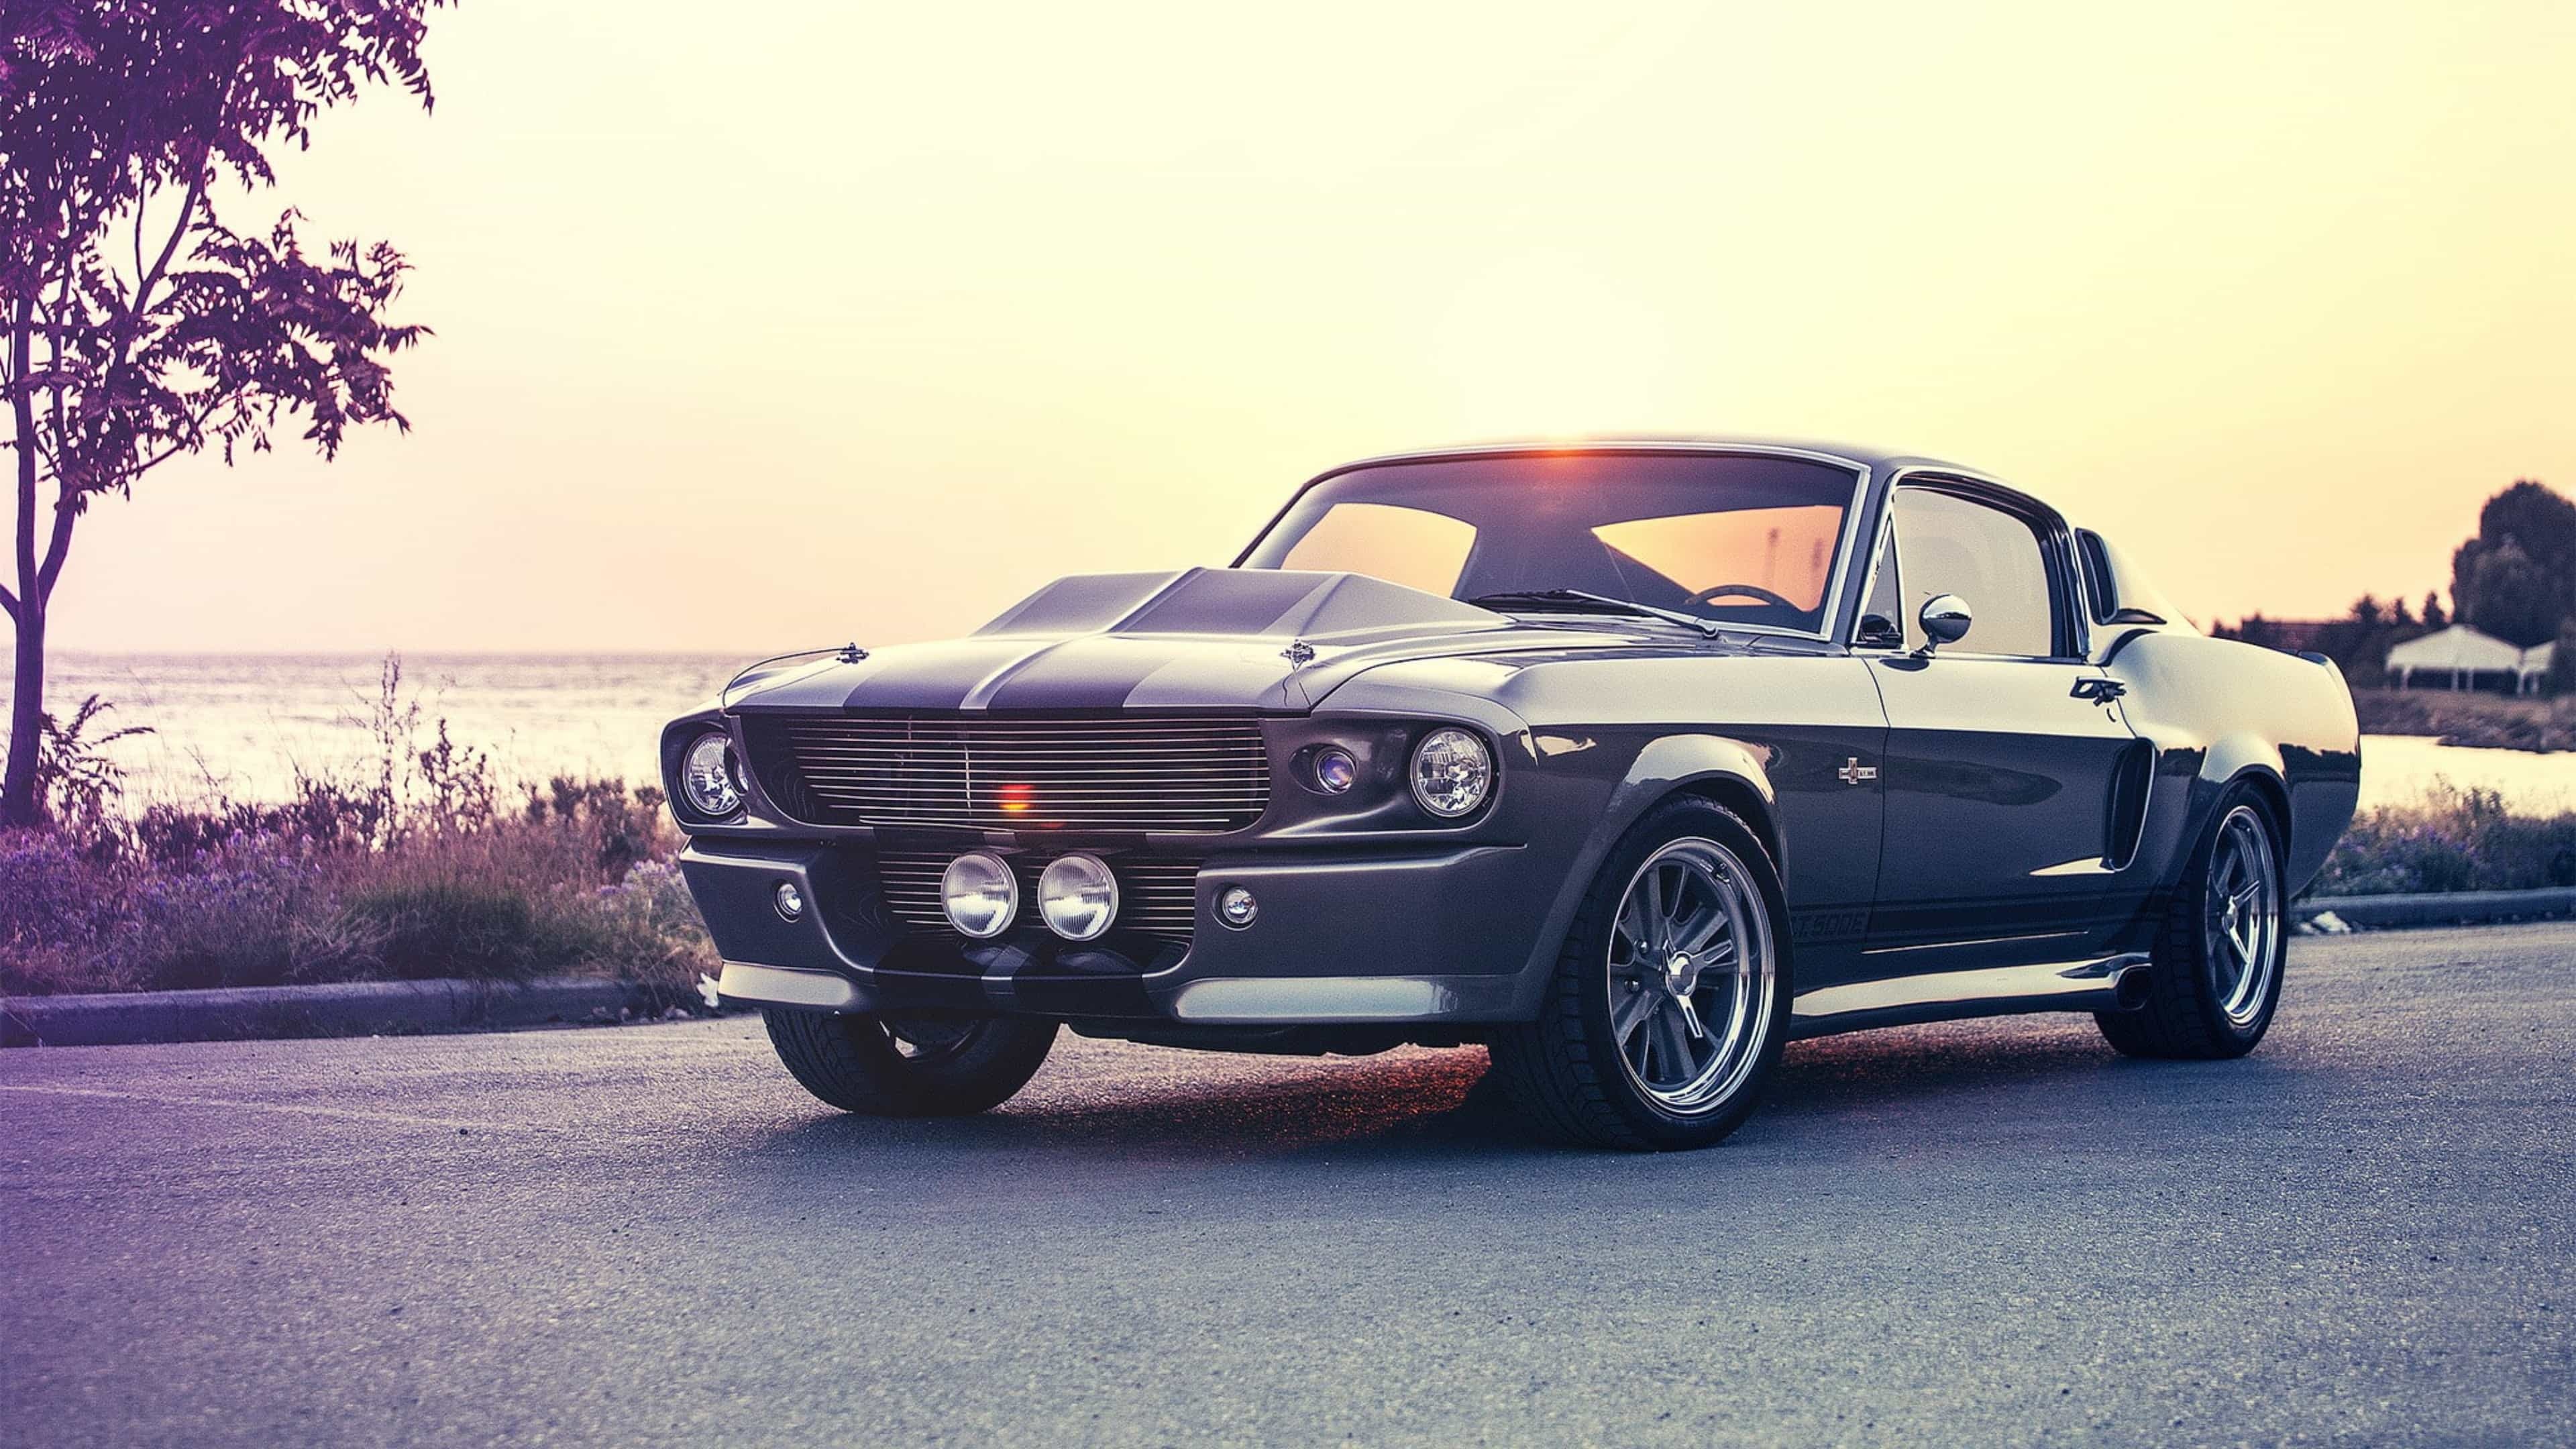 GT500, Mustang Shelby, Iconic sports car, Performance and style, 3840x2160 4K Desktop